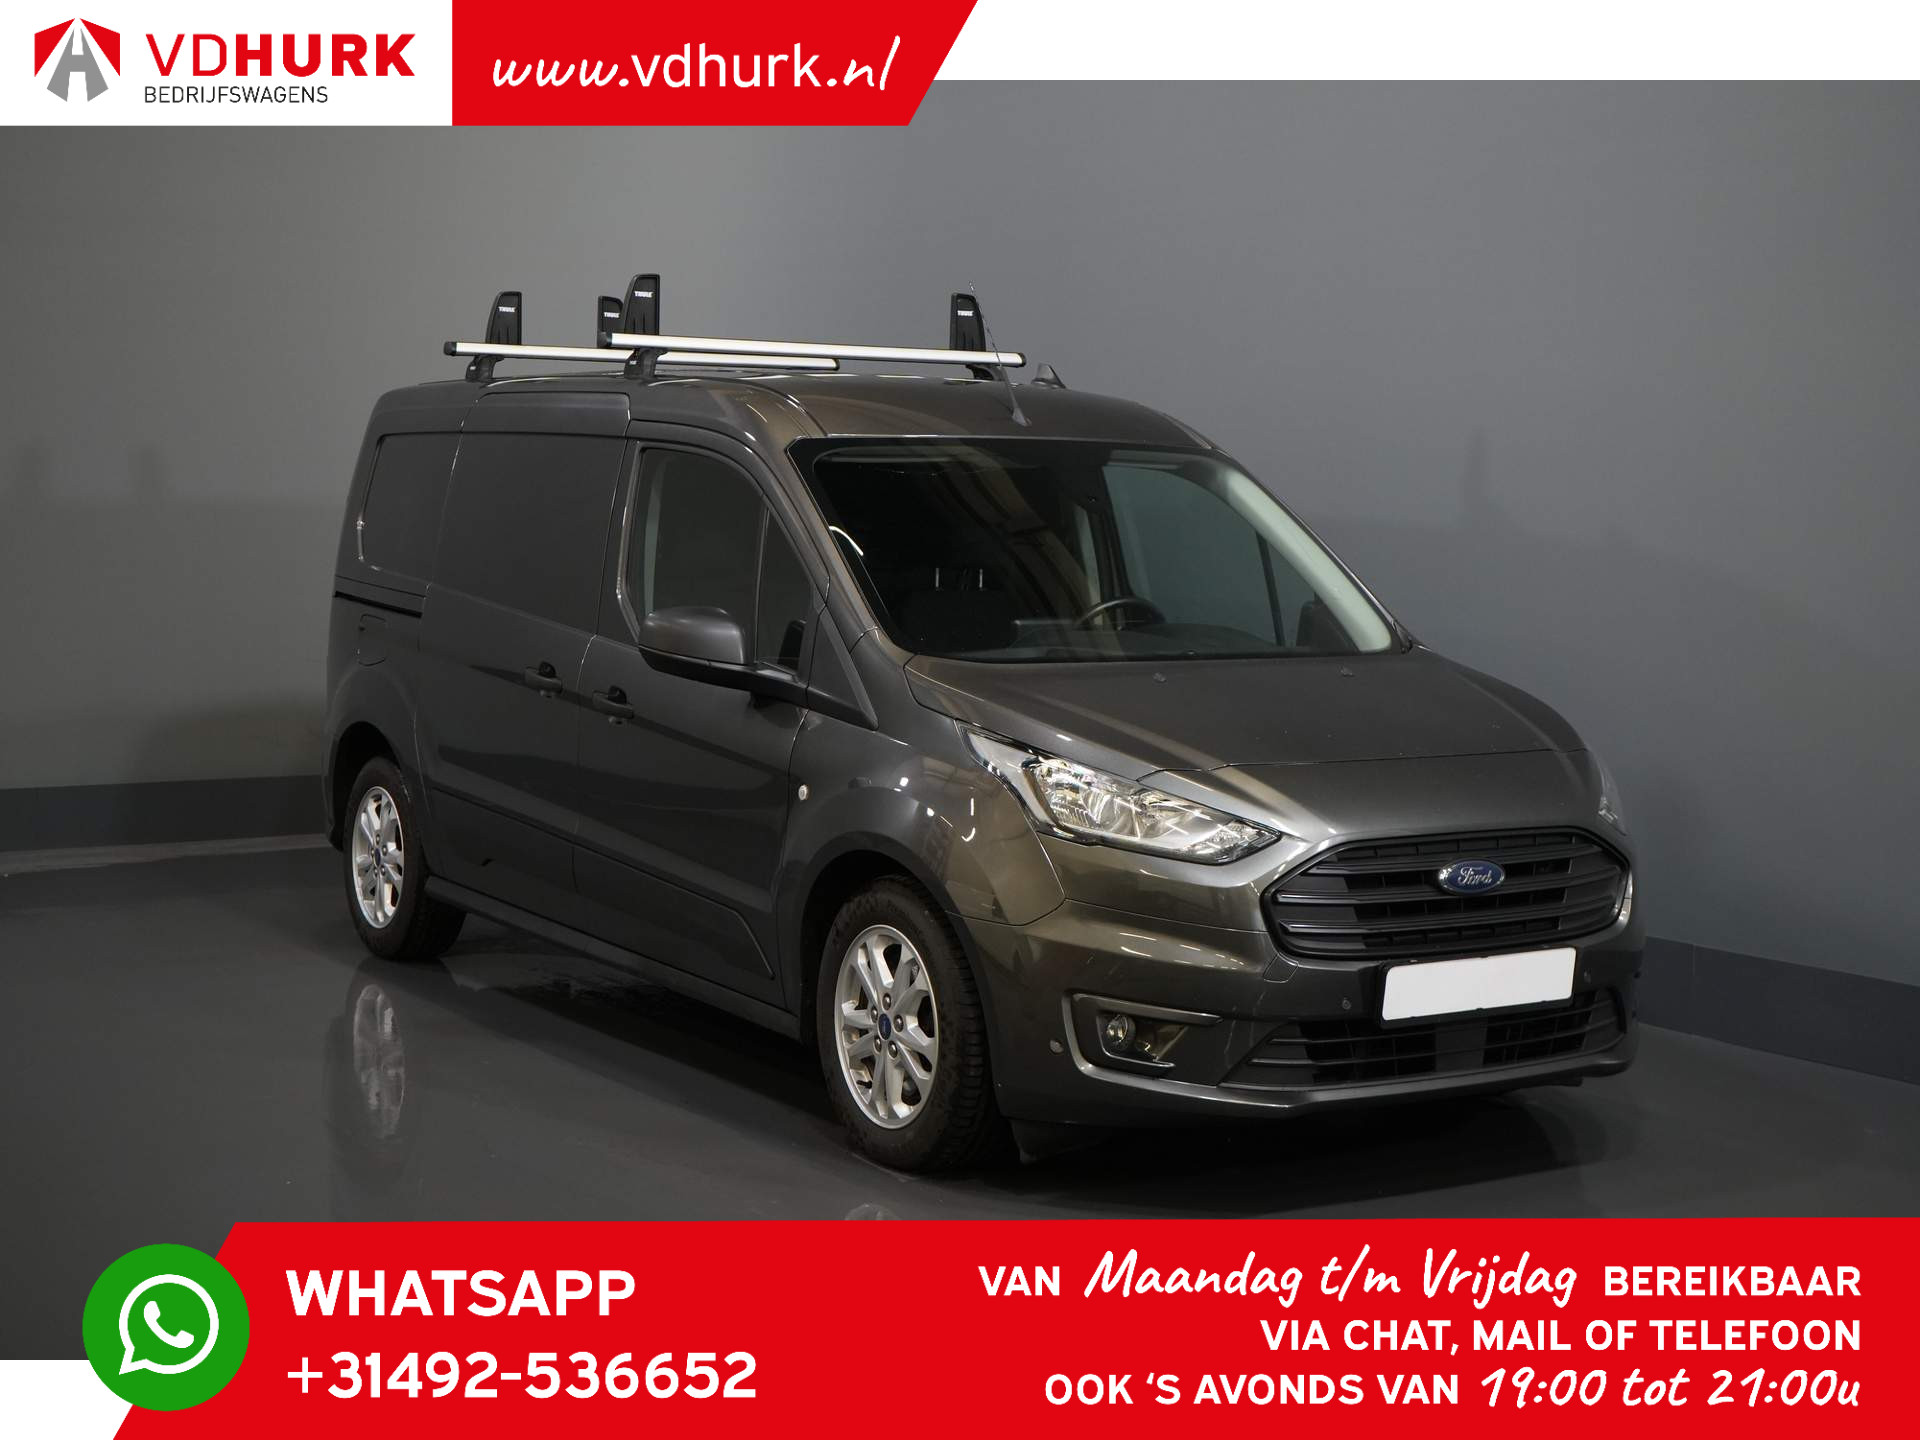 Ford Transit Connect 1.5 TDCI 120 pk Aut. L2 3Pers./ Inrichting/ Standkachel/ Stoelverw./ Carplay/ PDC/ Camera/ Cruise/ Airco